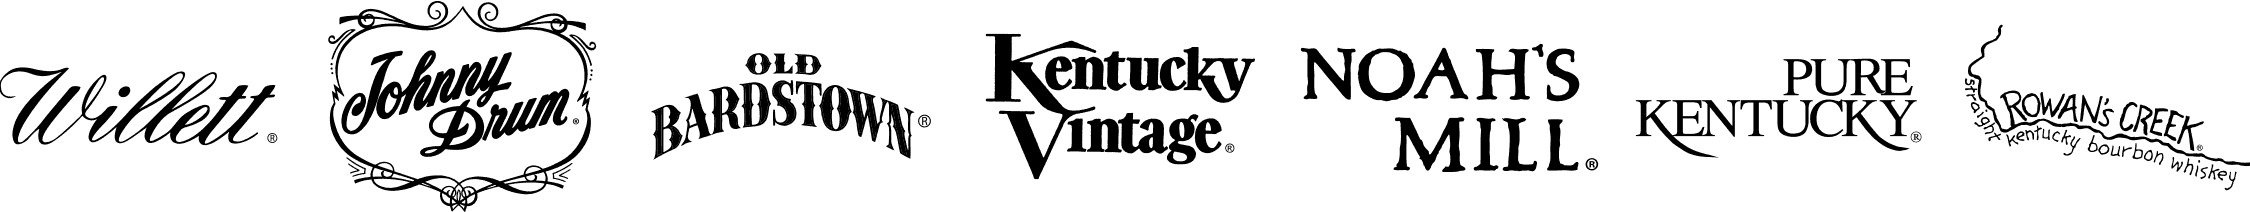 Antique Whiskey Logo - Welcome to Willett Distillery - Makers of Kentucky Bourbon Whiskey